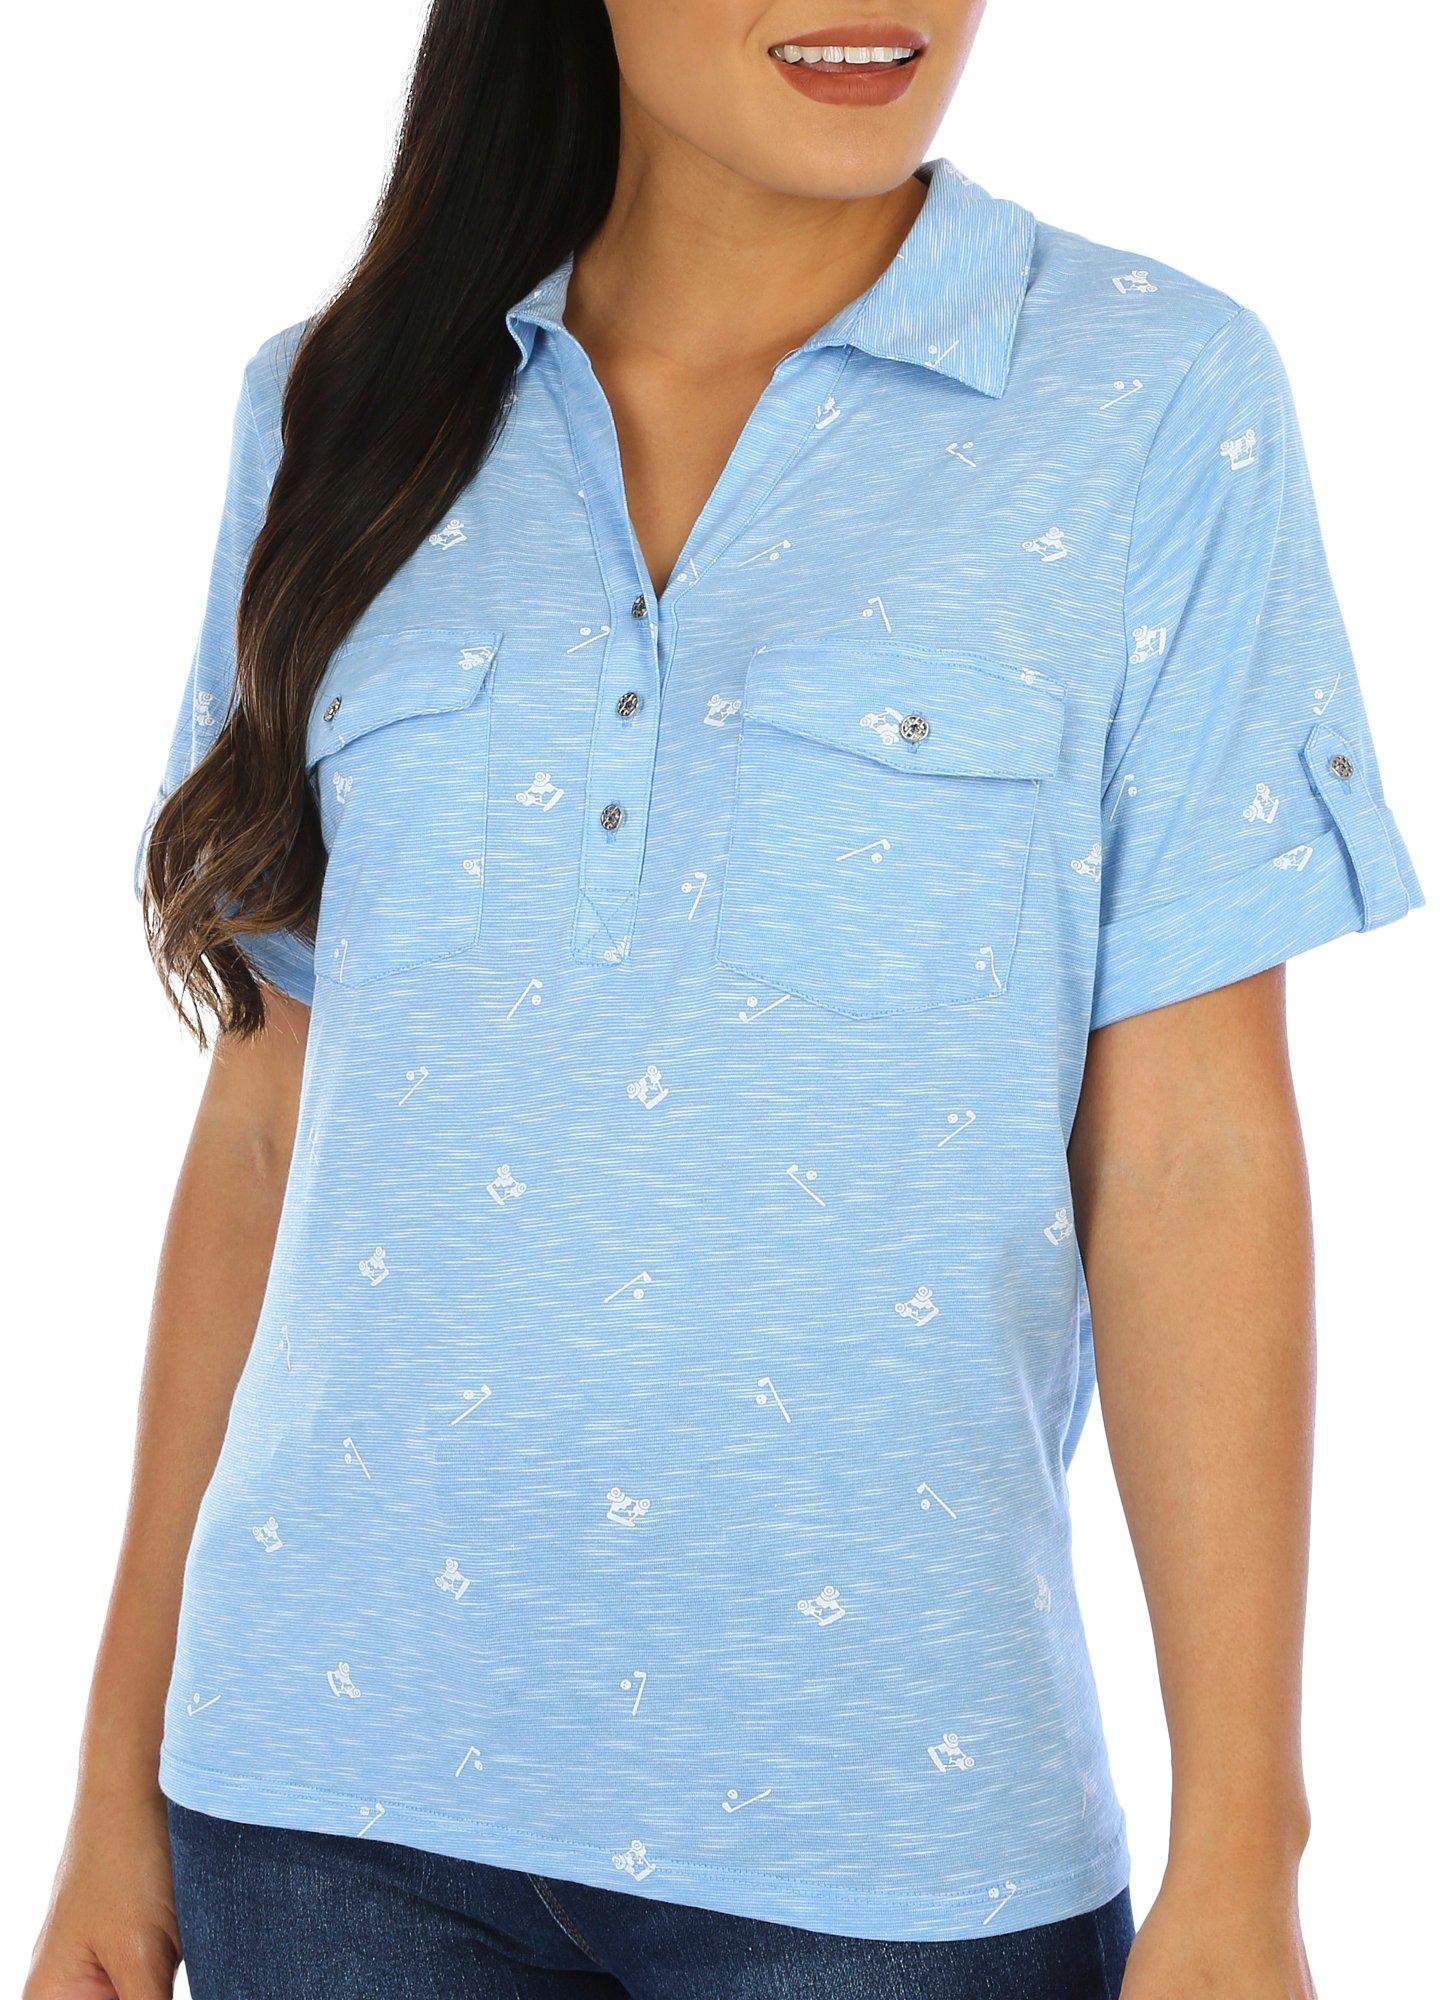 Coral Bay Petite Golf Clubs Short Sleeve Polo